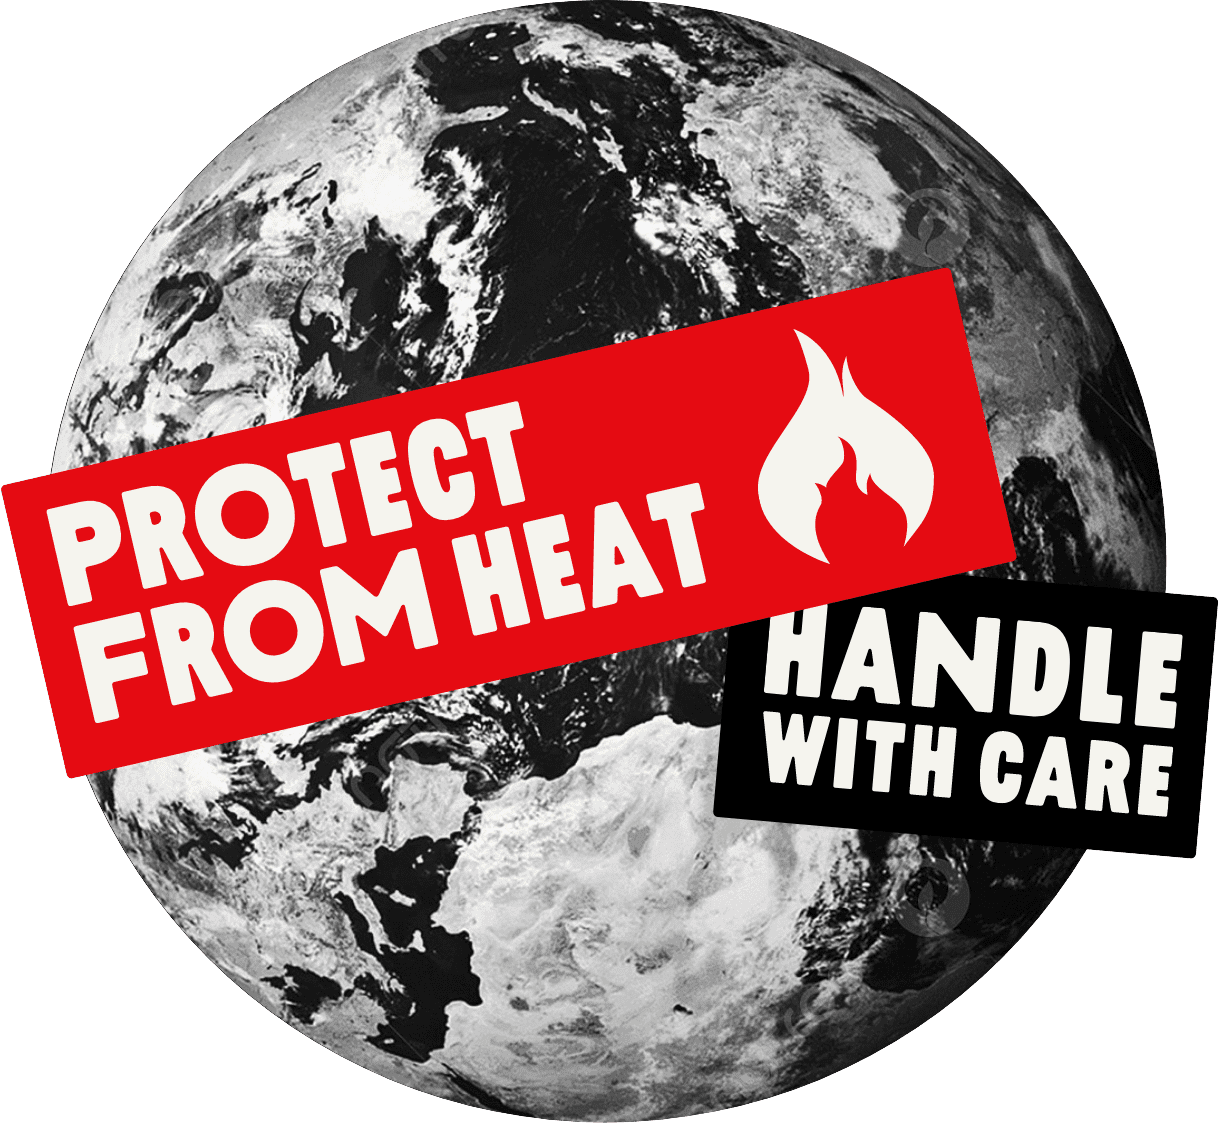 Black and white earth in background. There is red tag across the globe reading: Protect from heat (with a fire symbol). There is also a smaller black tag reading: Handle with care.